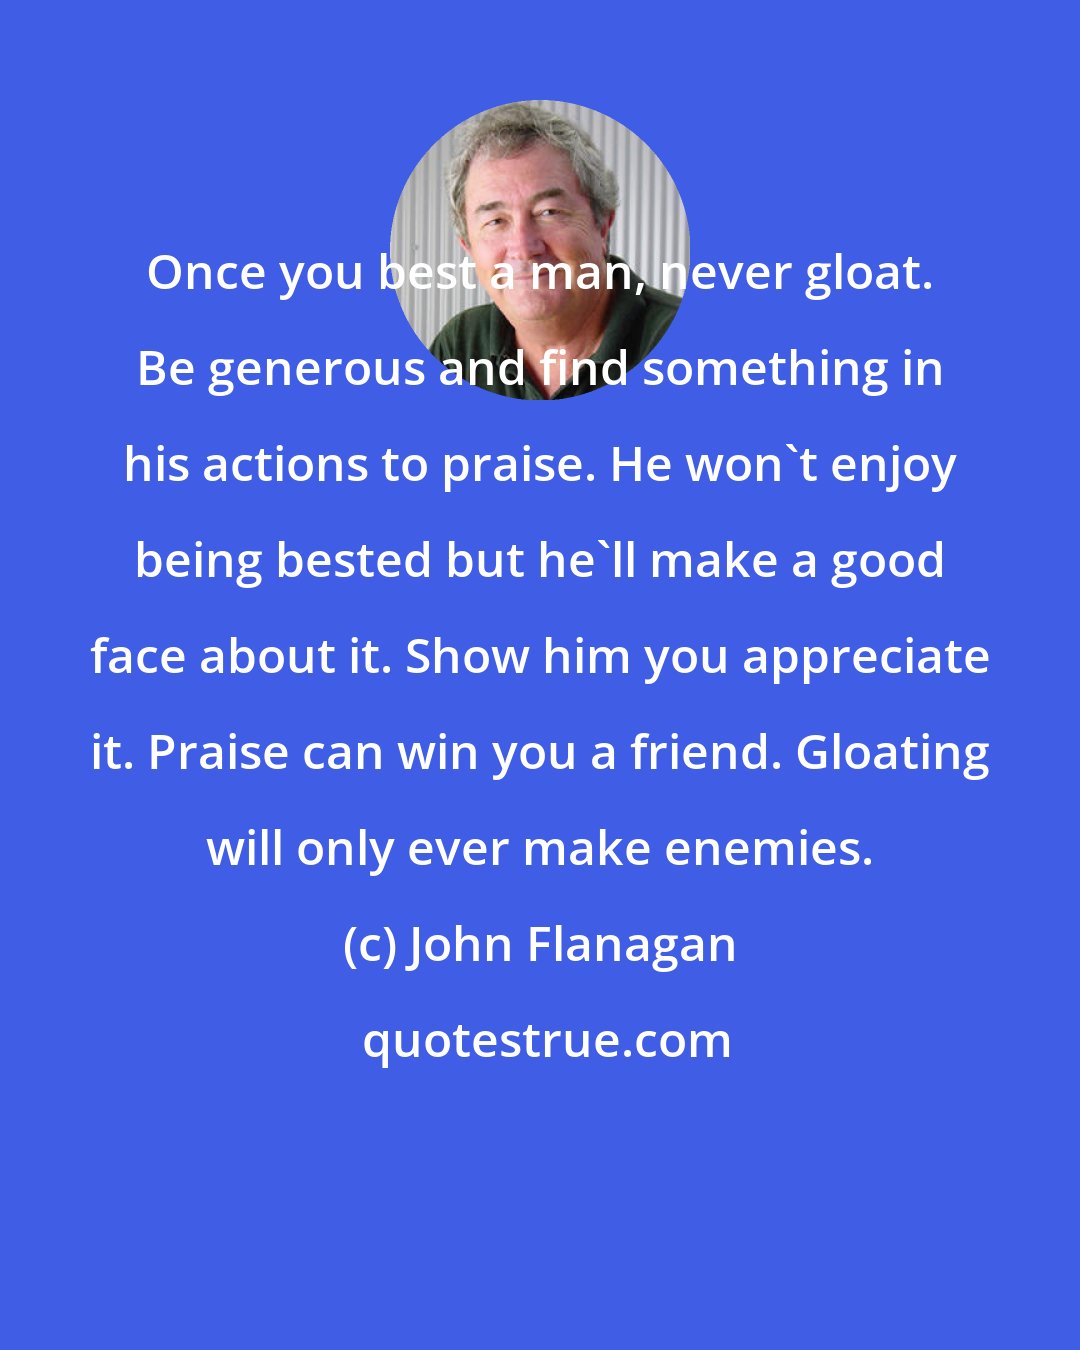 John Flanagan: Once you best a man, never gloat. Be generous and find something in his actions to praise. He won't enjoy being bested but he'll make a good face about it. Show him you appreciate it. Praise can win you a friend. Gloating will only ever make enemies.